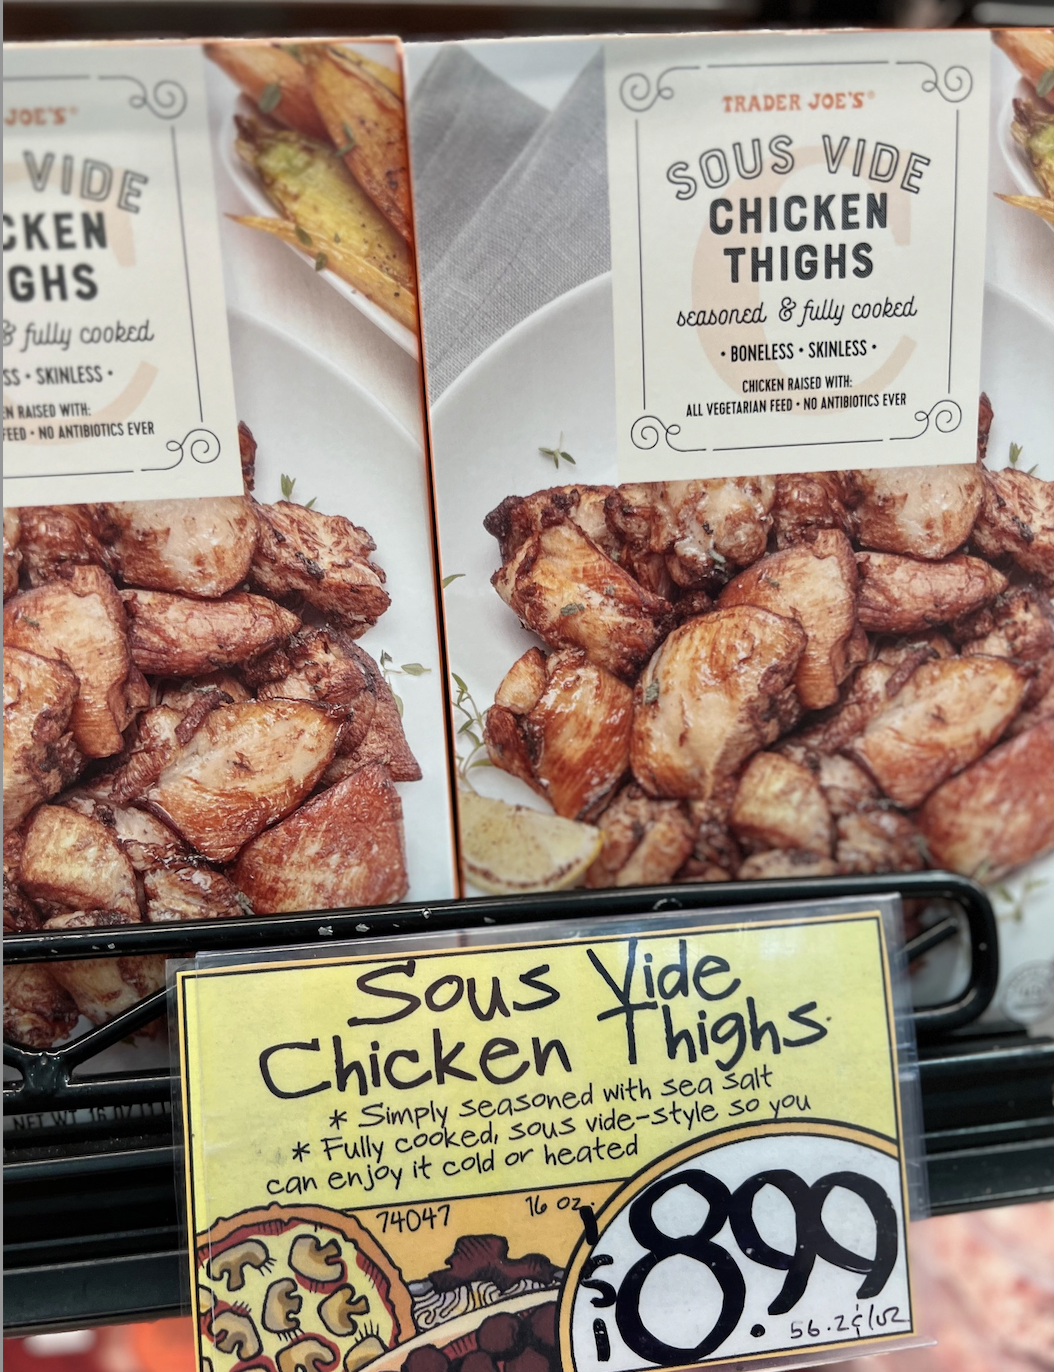 Packaged Sous Vide Chicken Thighs at a grocery store, price label showing $8.99